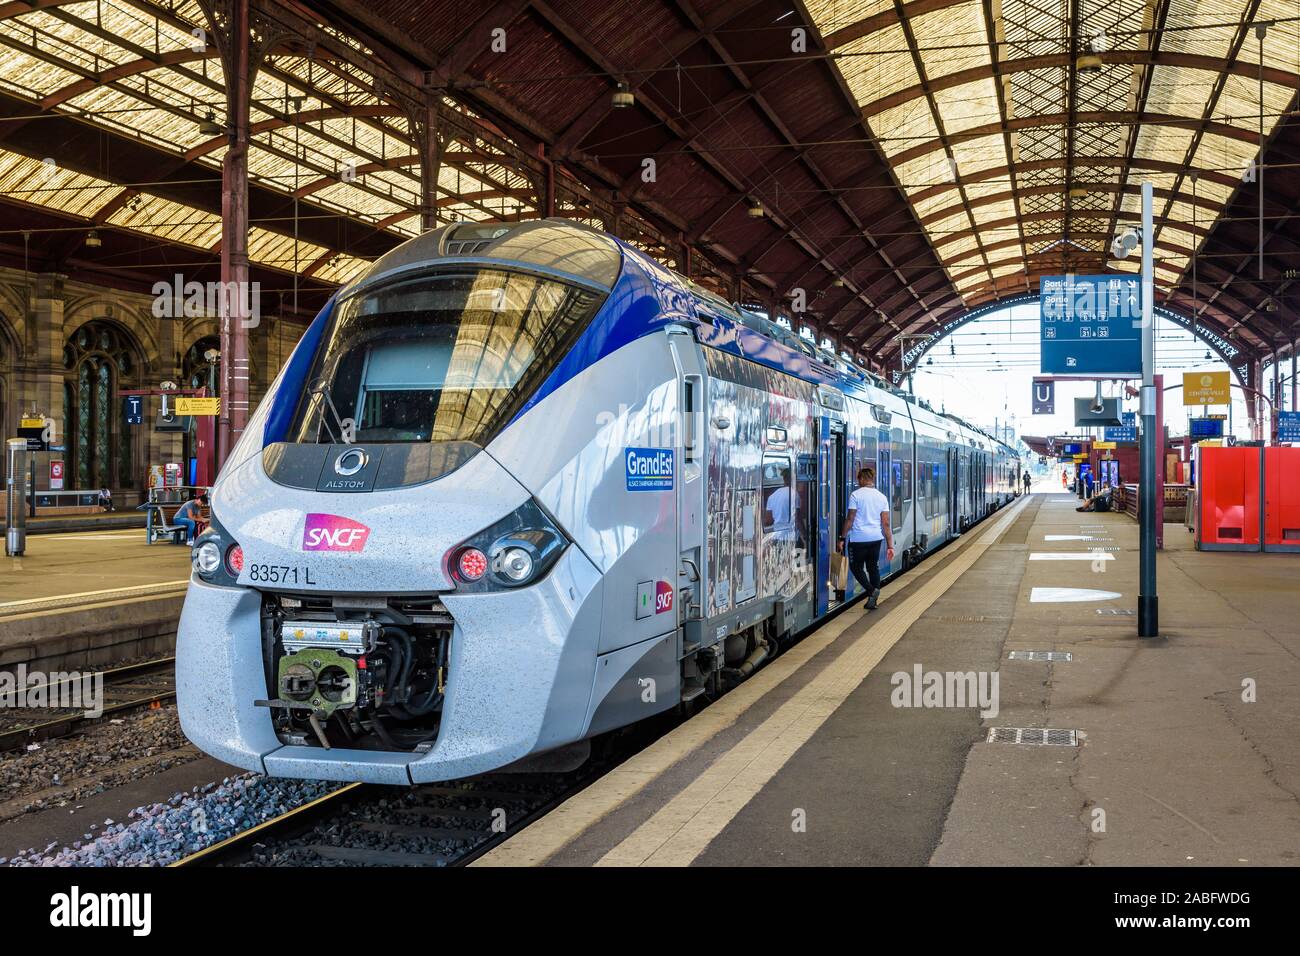 A Regiolis TER regional train from french company SNCF is stationing at the platform in Strasbourg train station, waiting for passengers to get on. Stock Photo